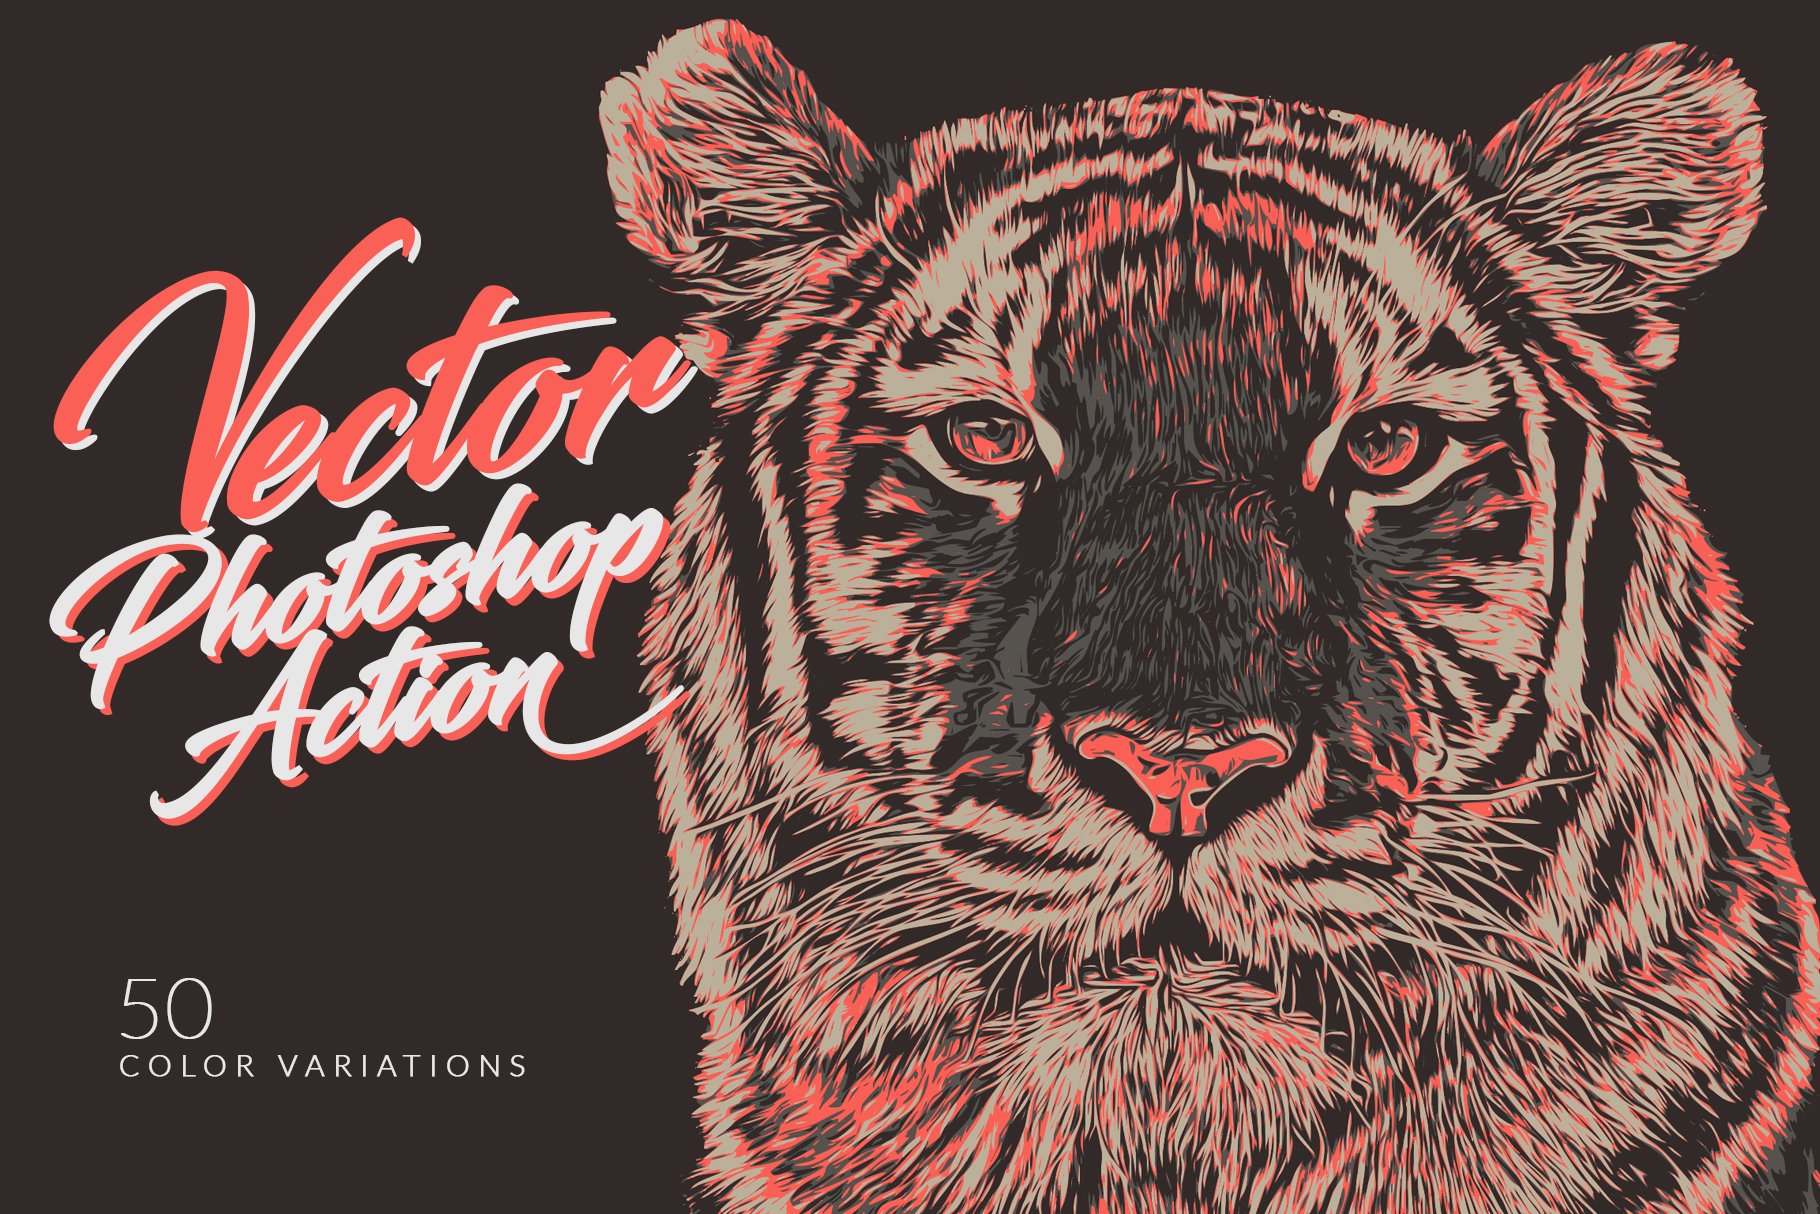 Vector Photoshop Actioncover image.